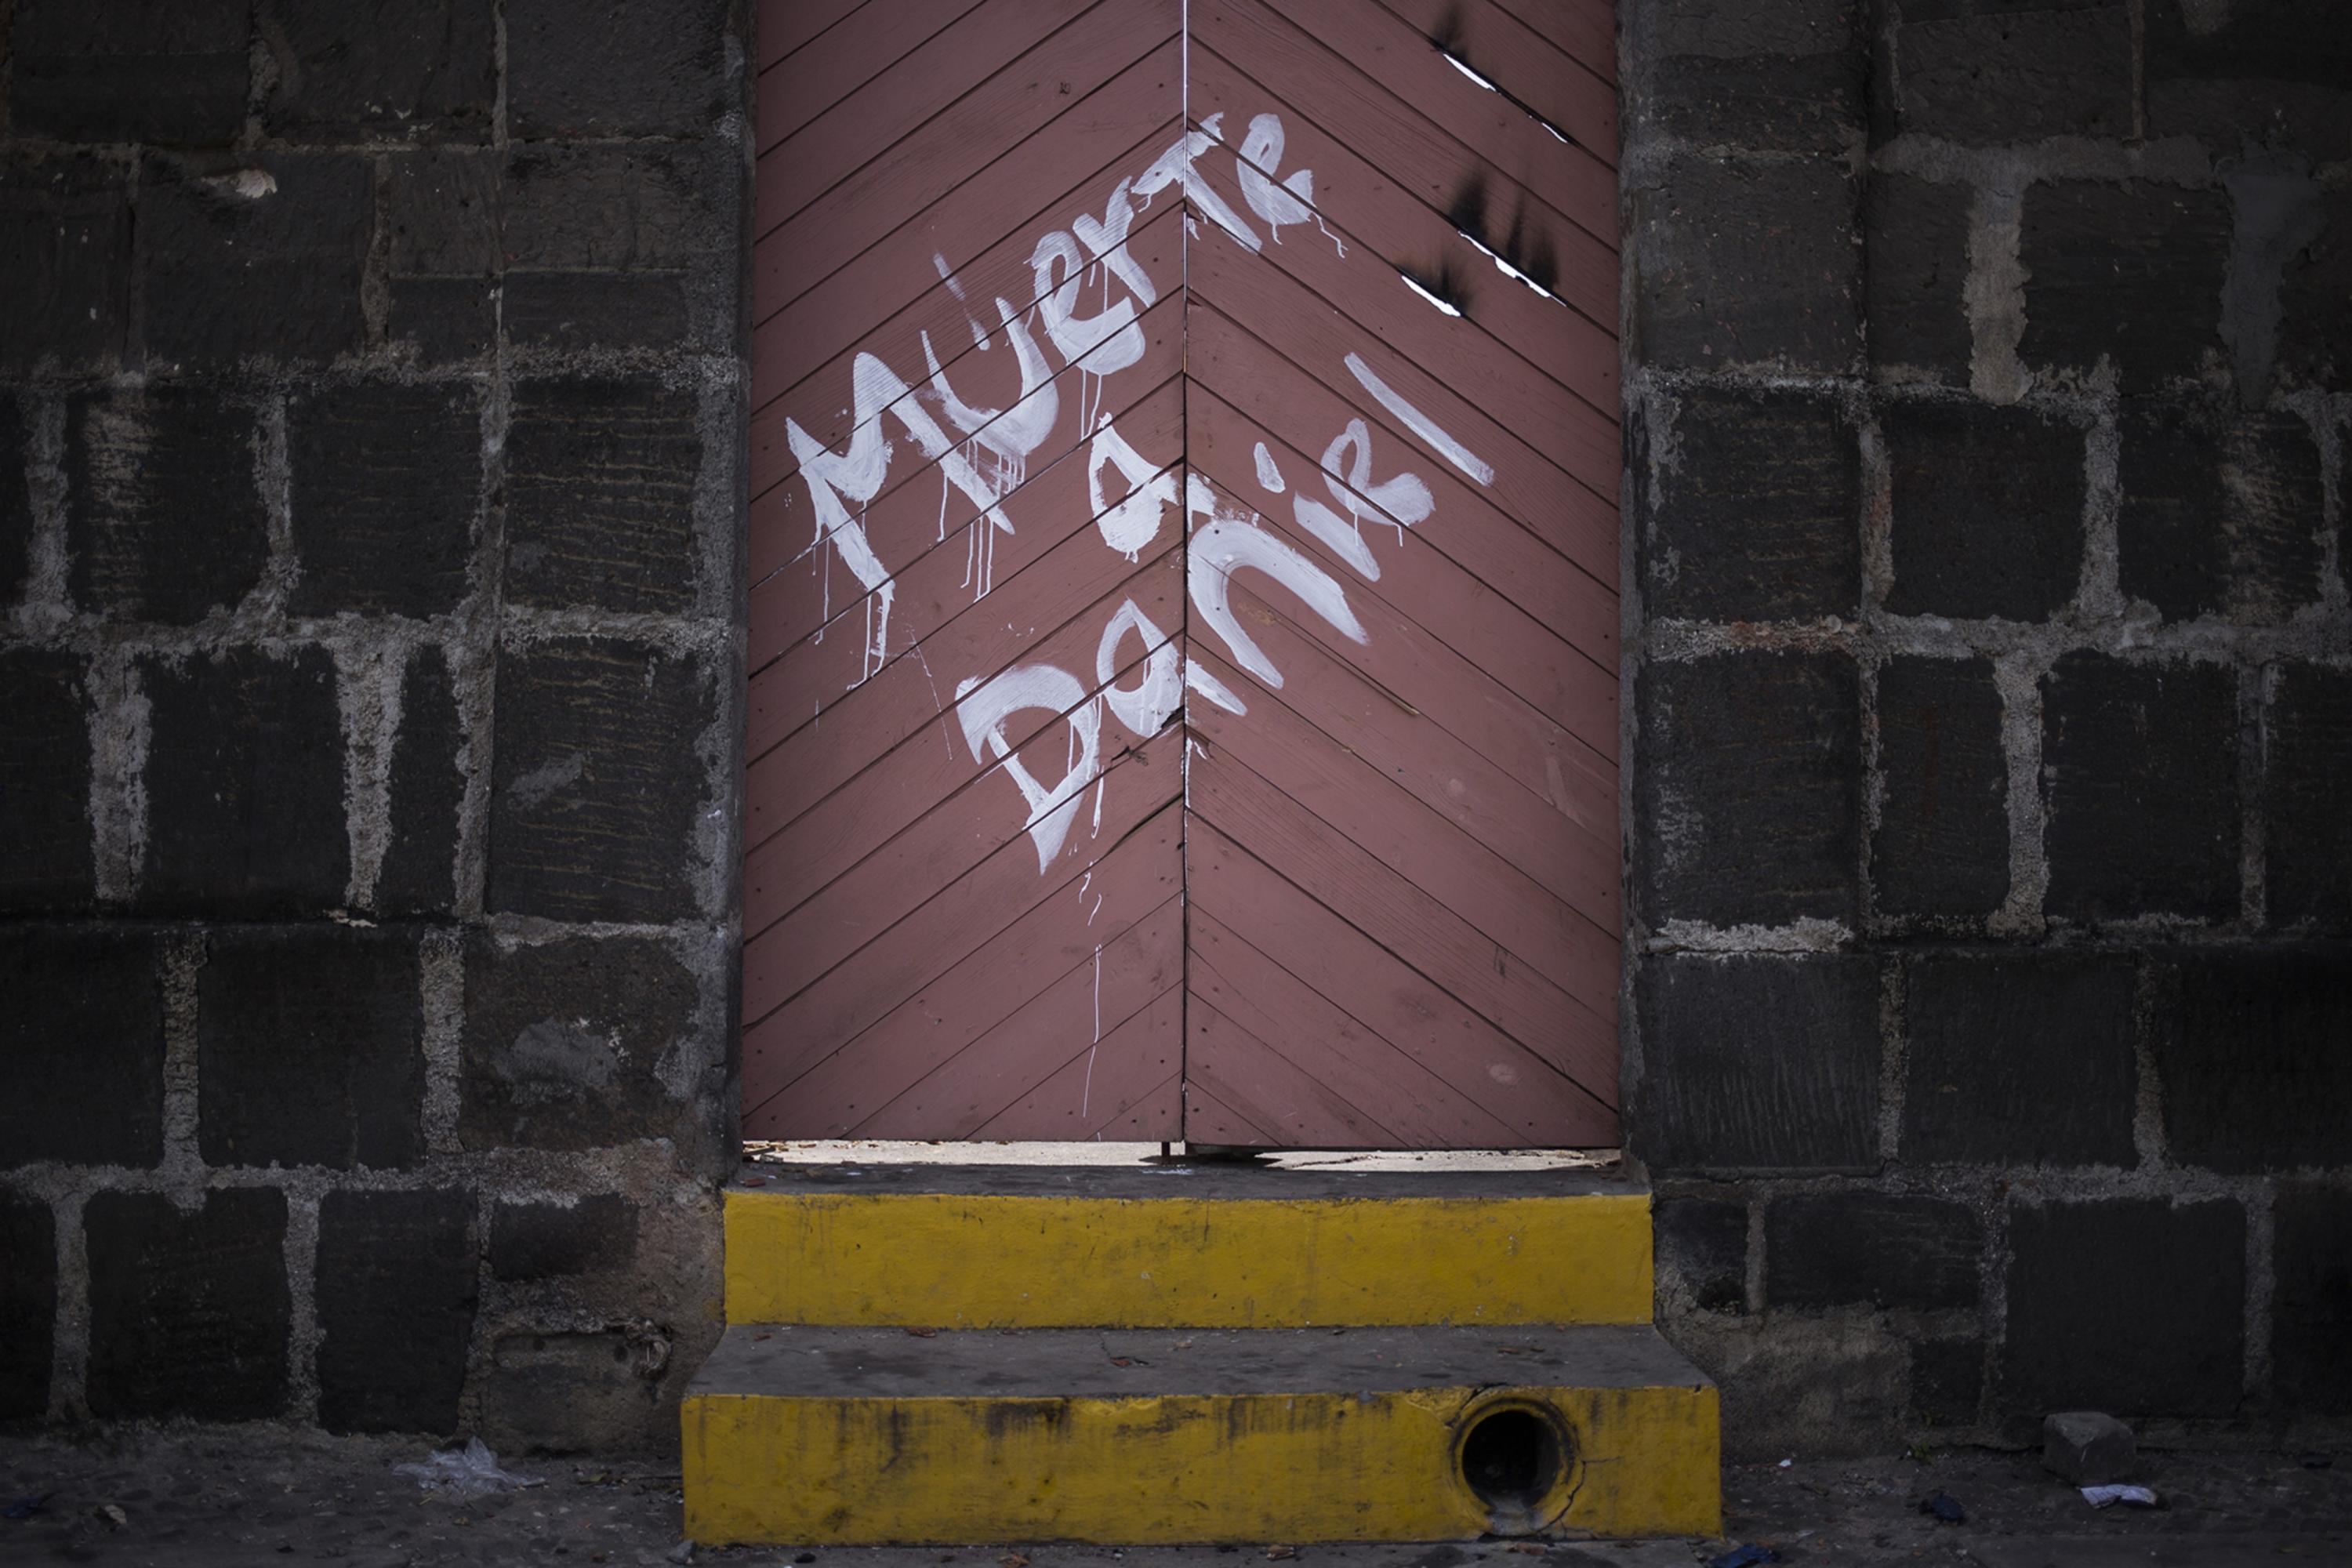 In 2018 the walls of Masaya were tagged with messages against Daniel Ortega and Rosario Murillo. Residents of the city spoke then of two revolutions: the first, at the end of the 1970s, in support of Daniel Ortega; the second, starting in April 2018, against the same former Sandinista commander. Photo Víctor Peña